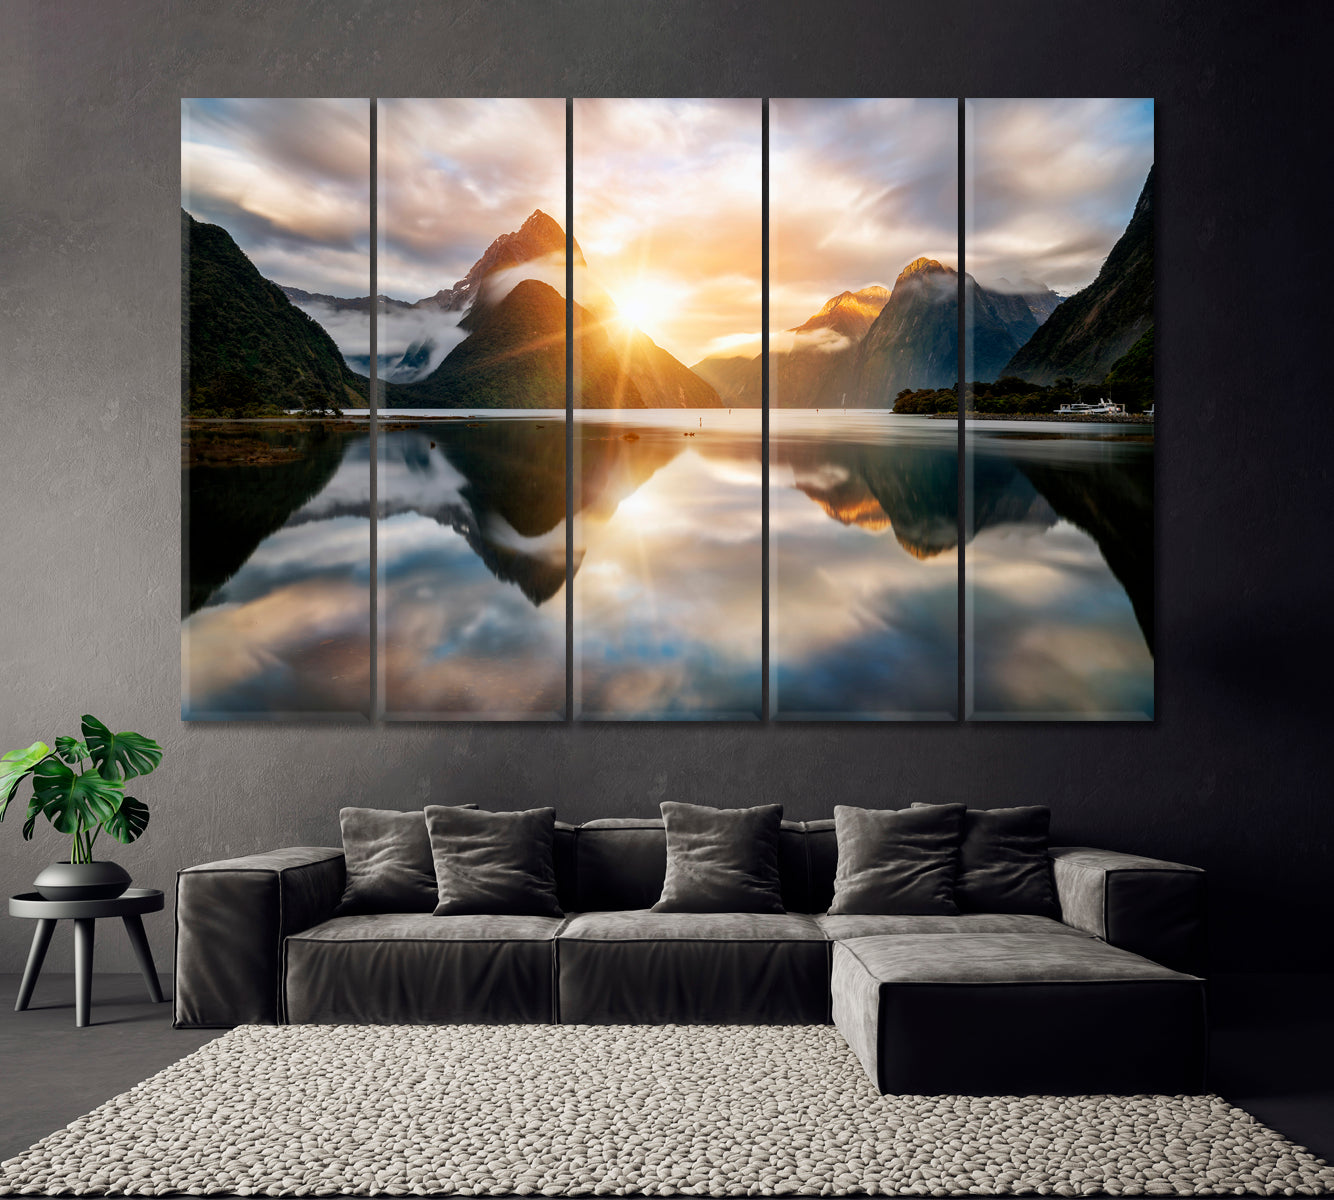 Amazing Sunrise in Milford Sound New Zealand Canvas Print ArtLexy 5 Panels 36"x24" inches 